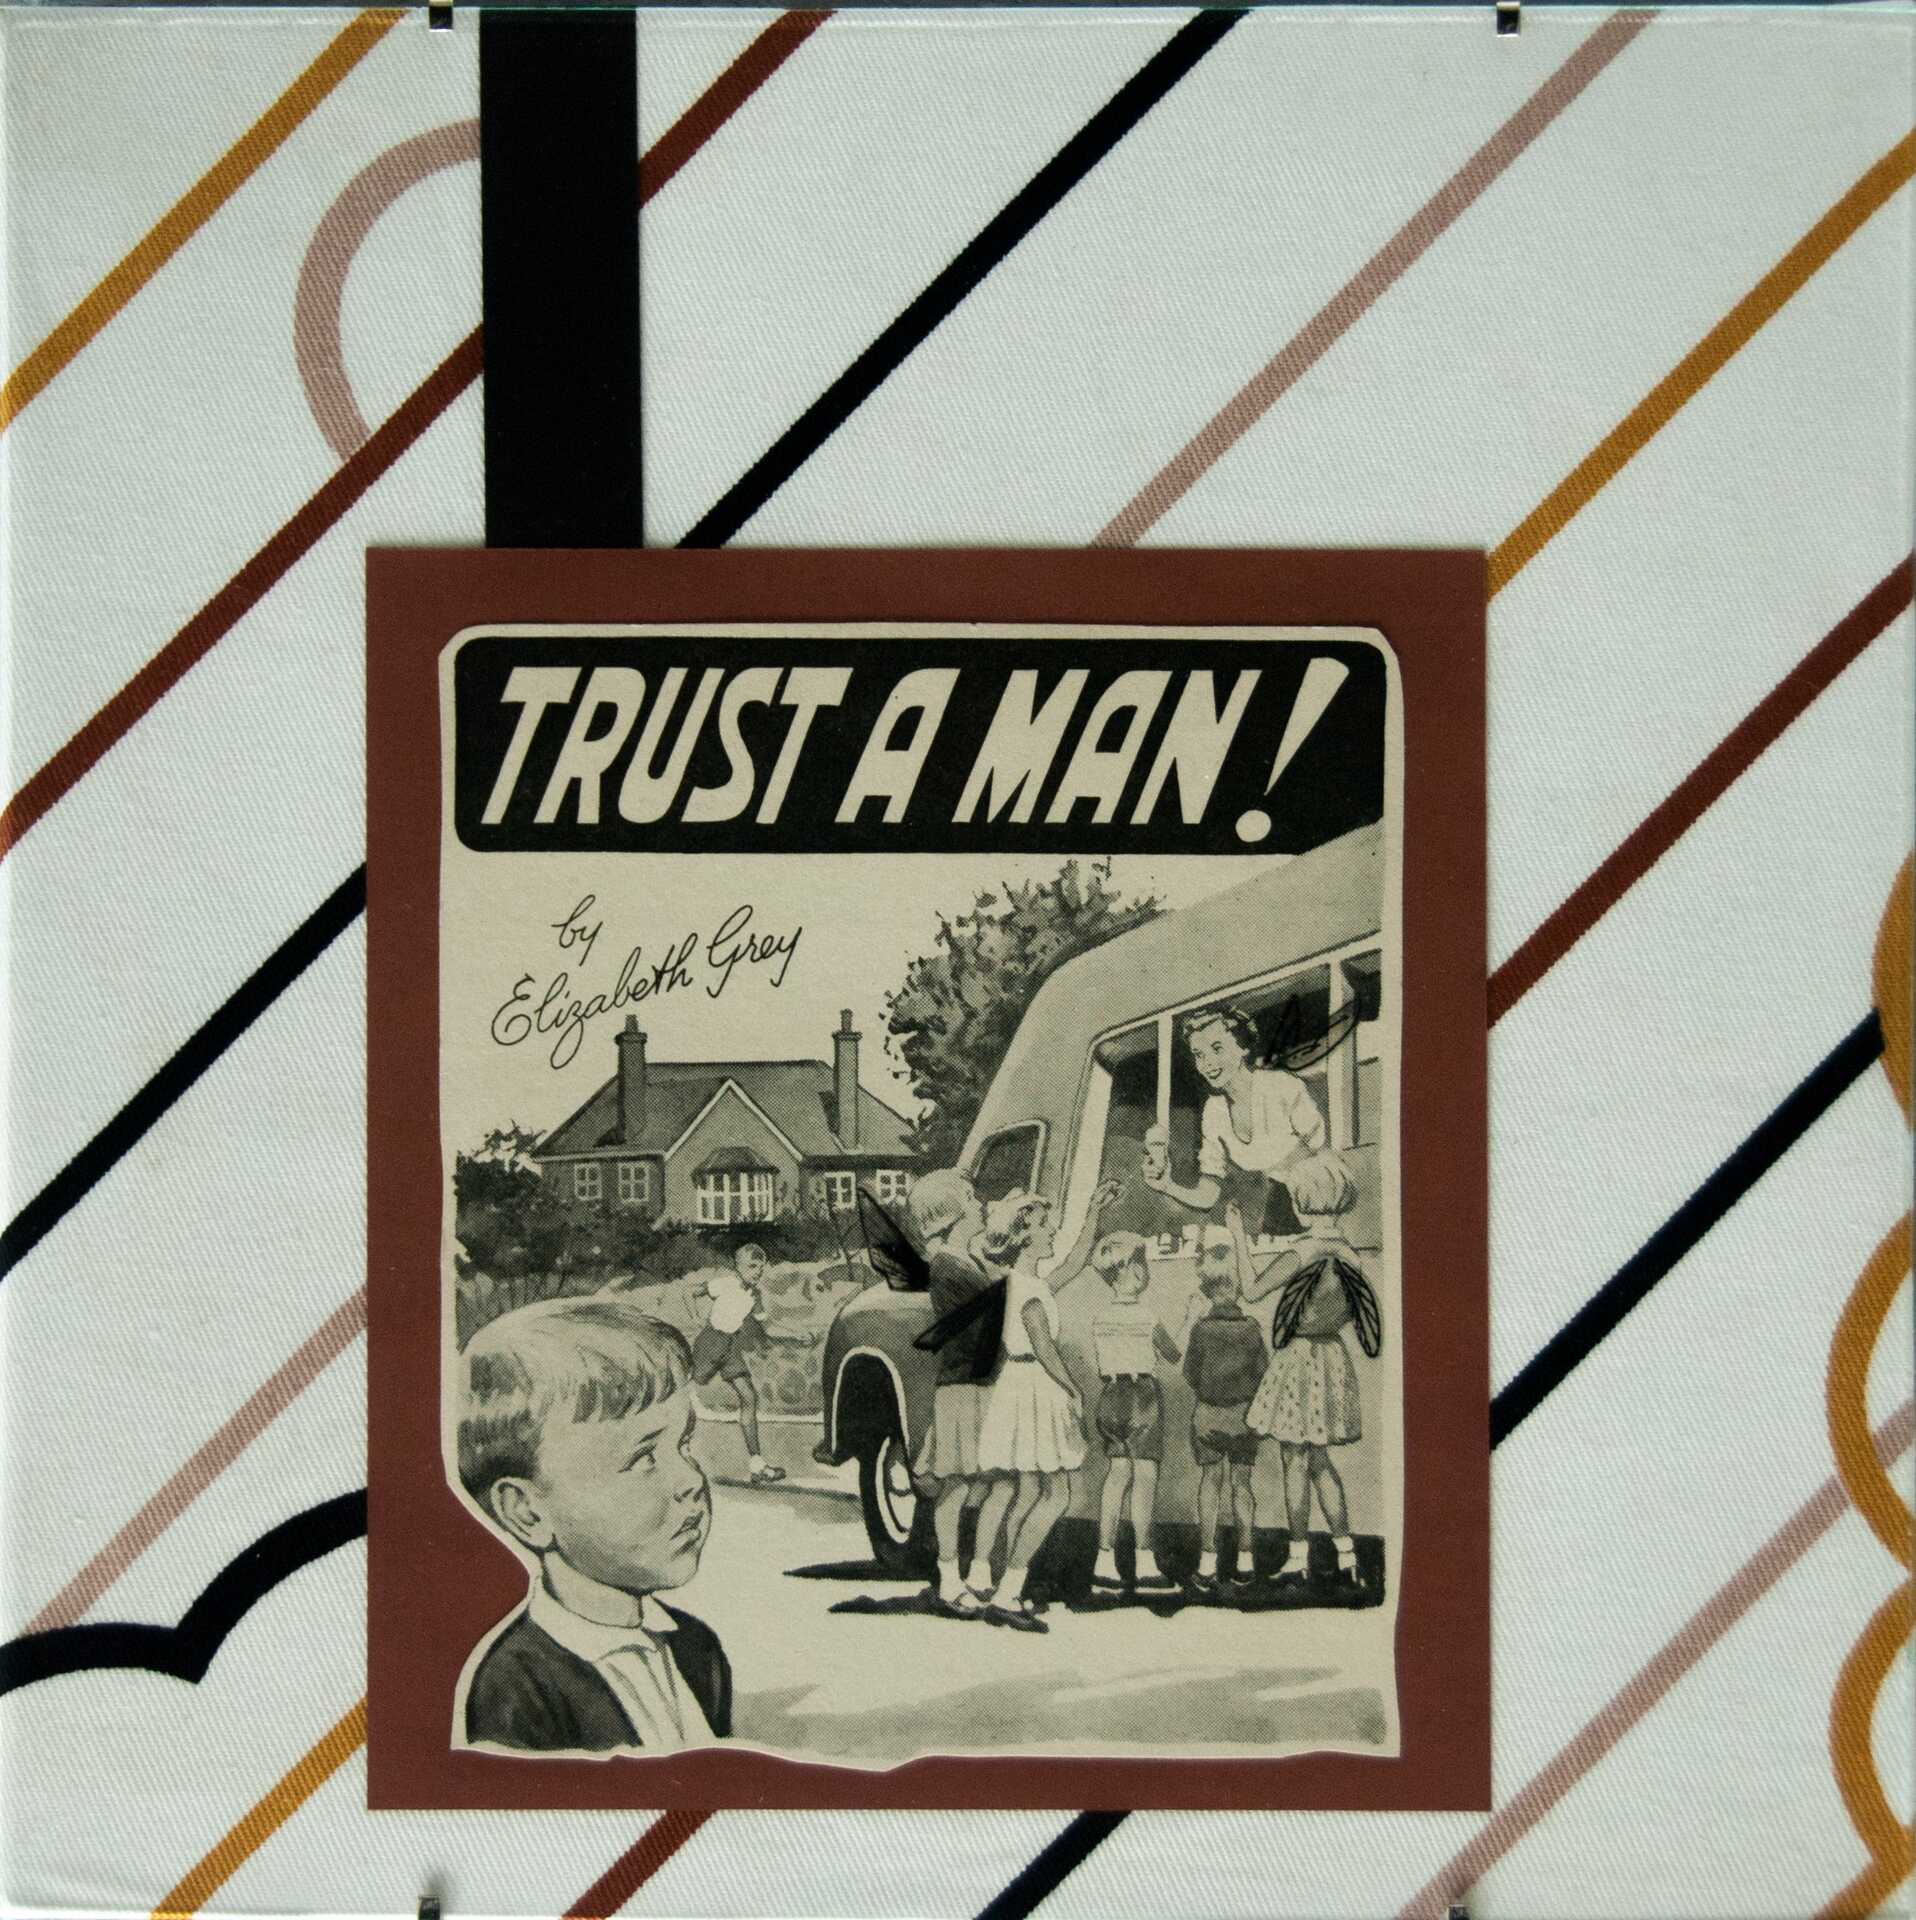 "Trust a Man!" by Libby Bloxham. A vintage book illustration is layered over brown card and white-with-brown-stripes vintage fabric, to create a square collage. The illustration depicts a woman serving a crowd of small children from an ice cream van, while in the foreground one small boy looks at them with great upset. The printed title reads 'Trust a Man! by Elizabeth Grey'. Acetate insect wings have been added to the woman and each of the girl children.